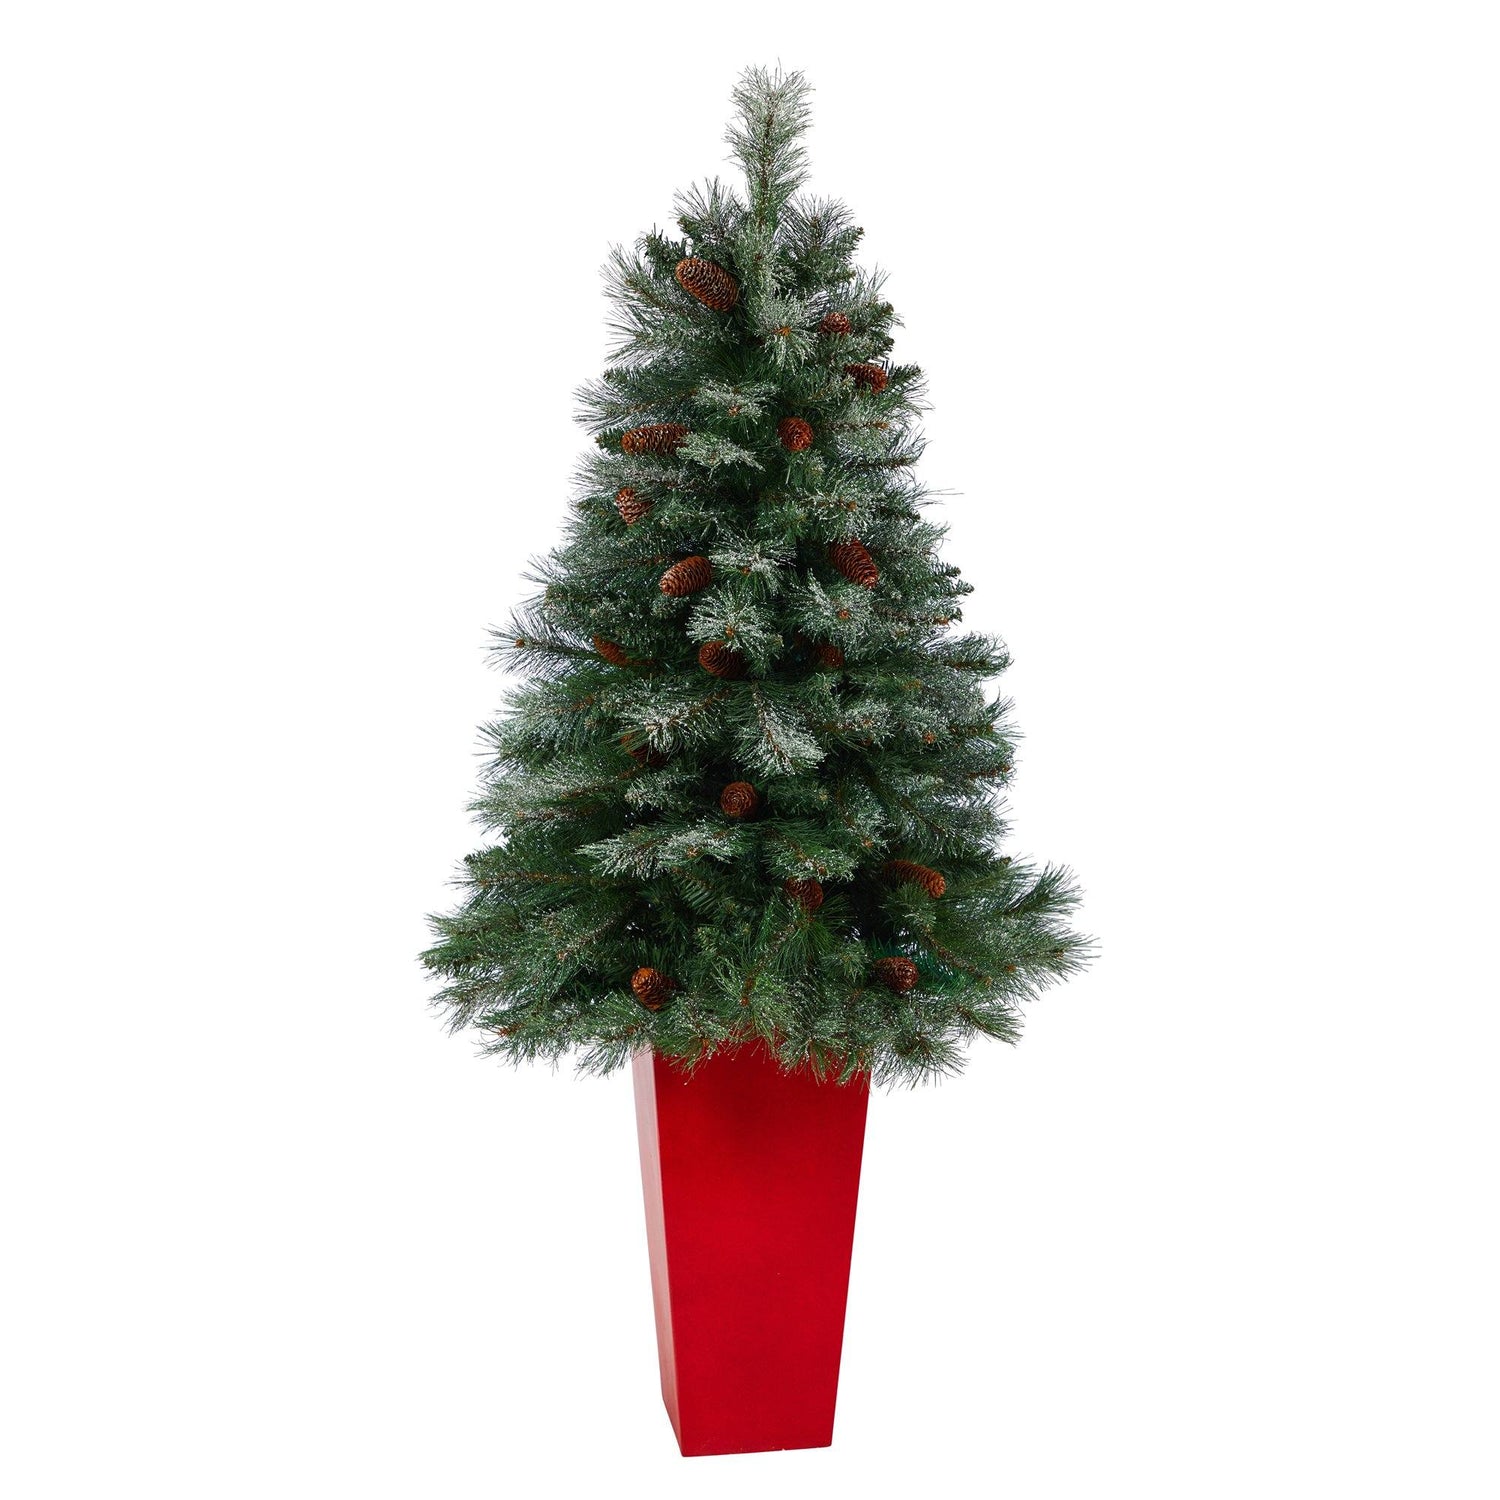 55” Snowed French Alps Mountain Pine Artificial Christmas Tree with 237 Bendable Branches and Pine Cones in Red Tower Planter